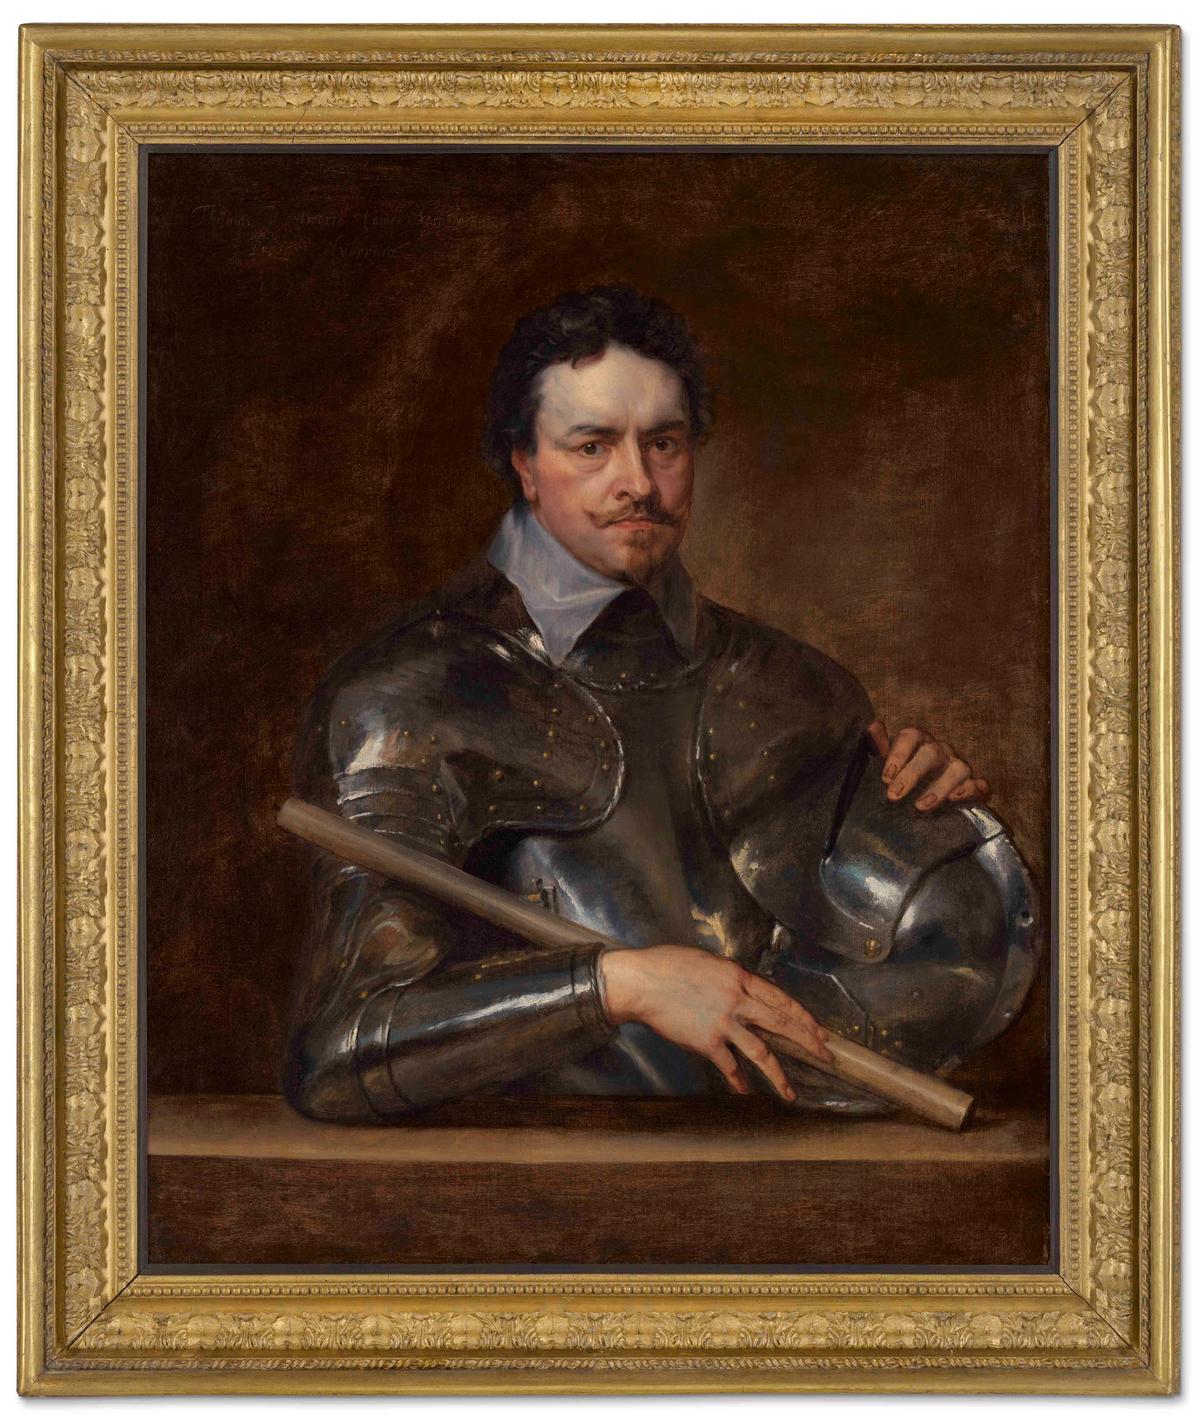 Portrait of Thomas Wentworth, 1st Earl of Strafford, by Anthony Van Dyck Courtesy of Christie's